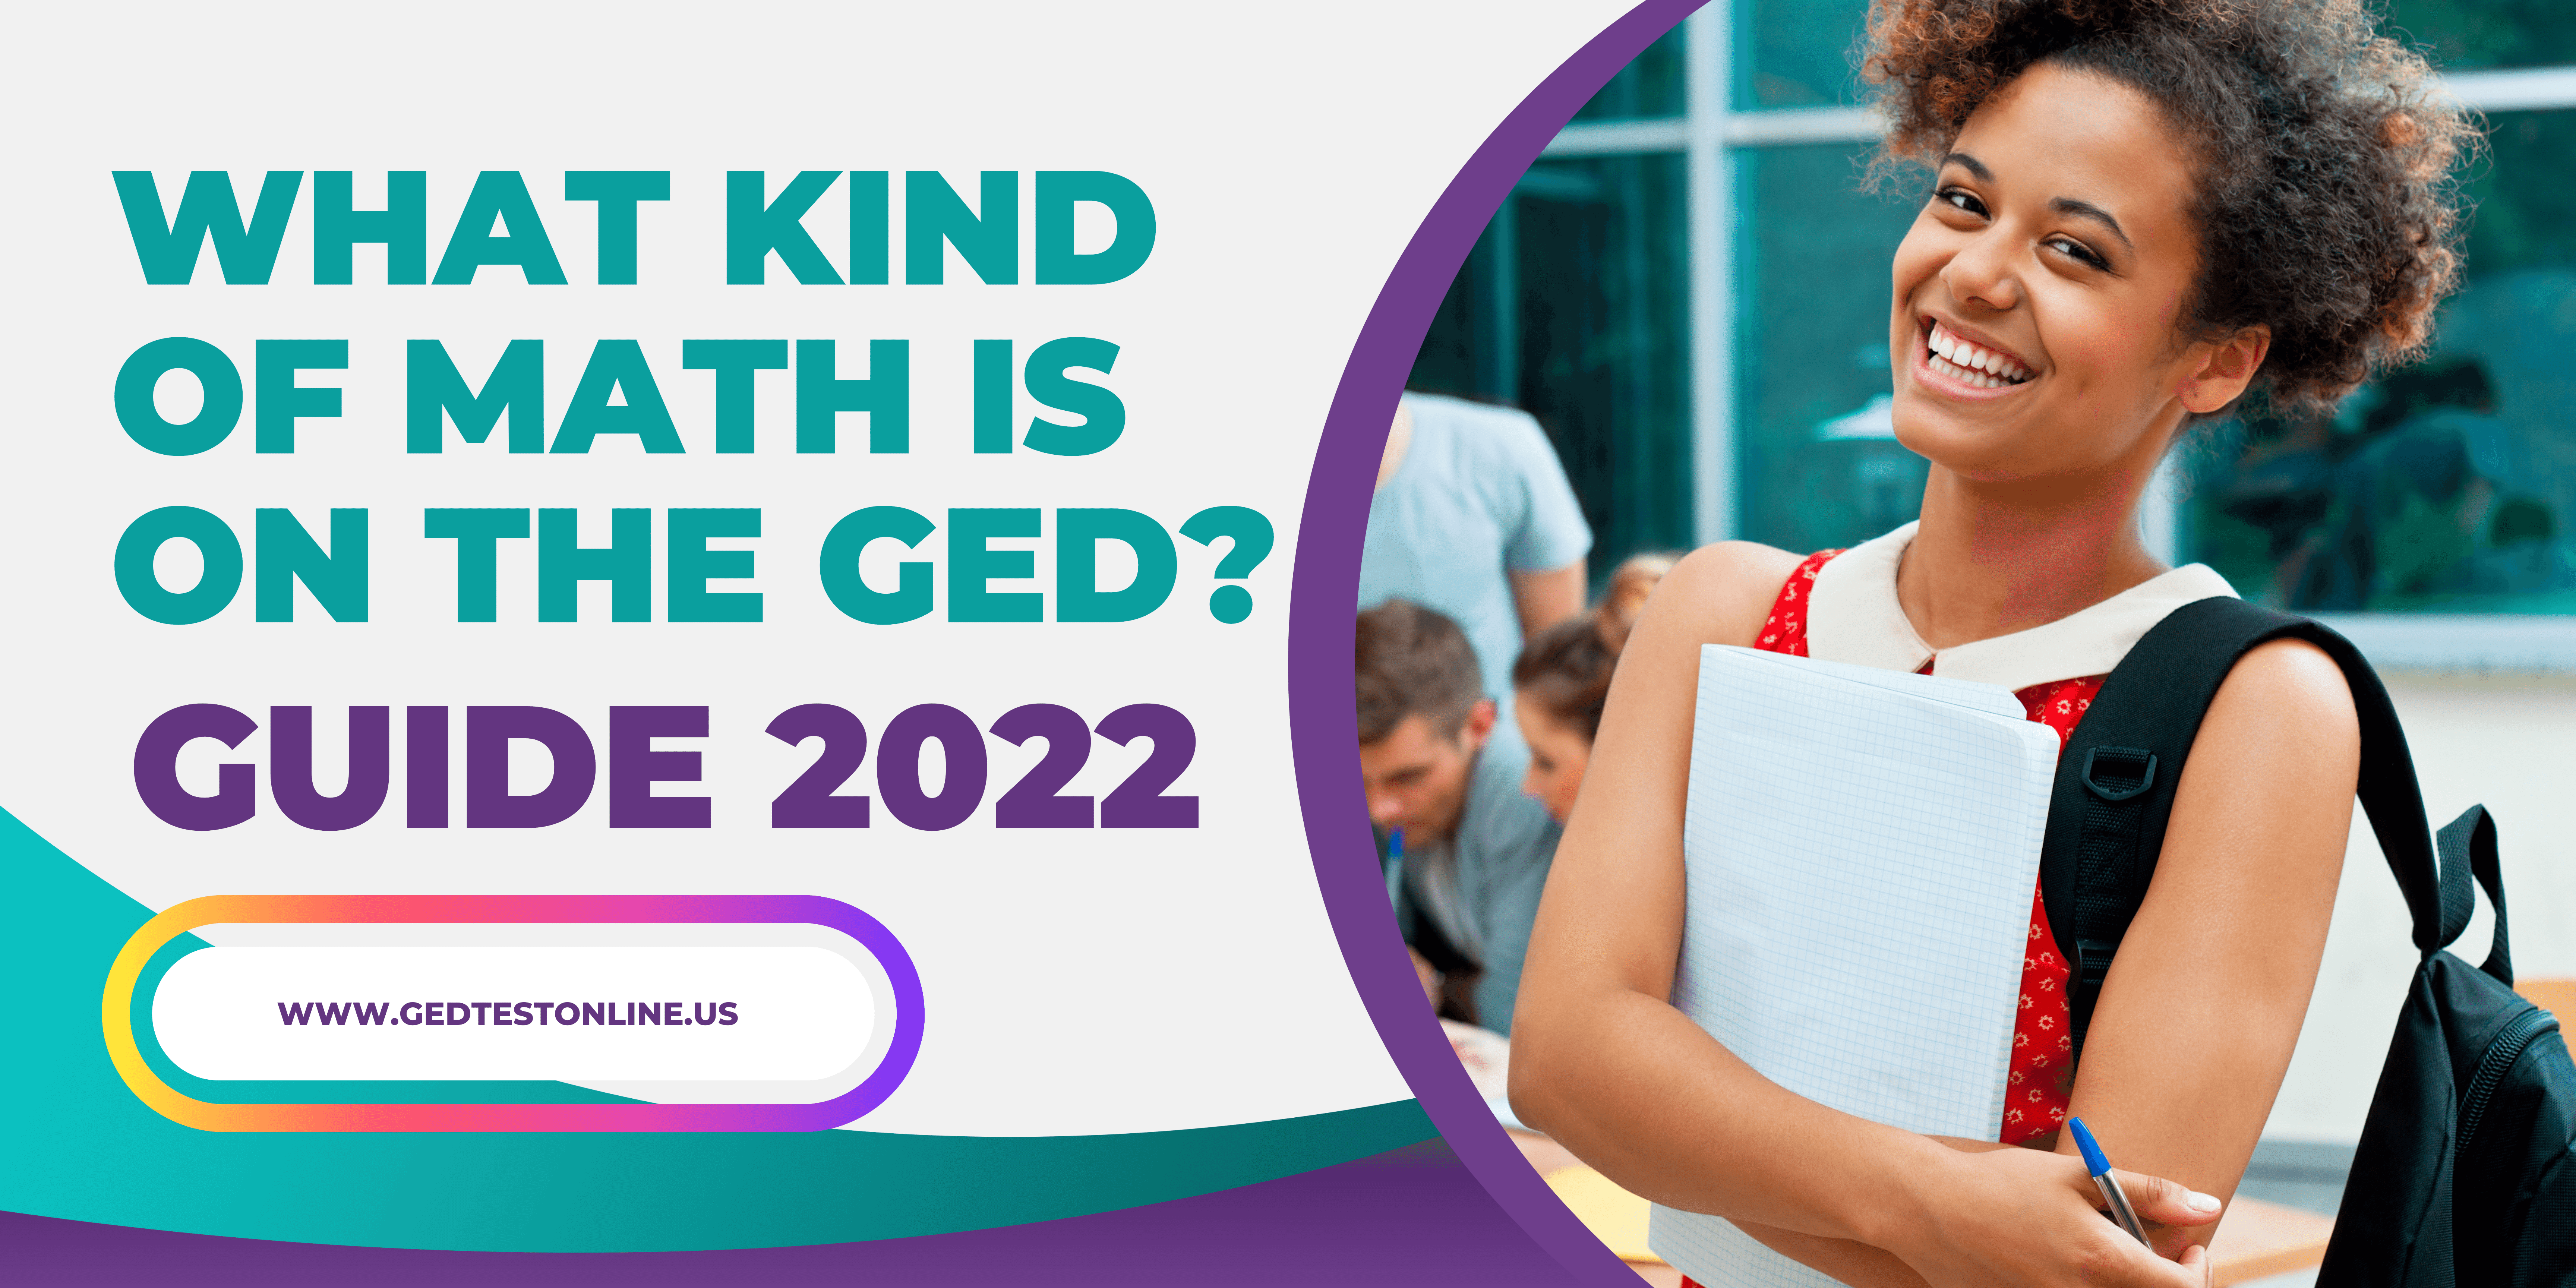 What Kind of Math is on the GED? Guide 2022